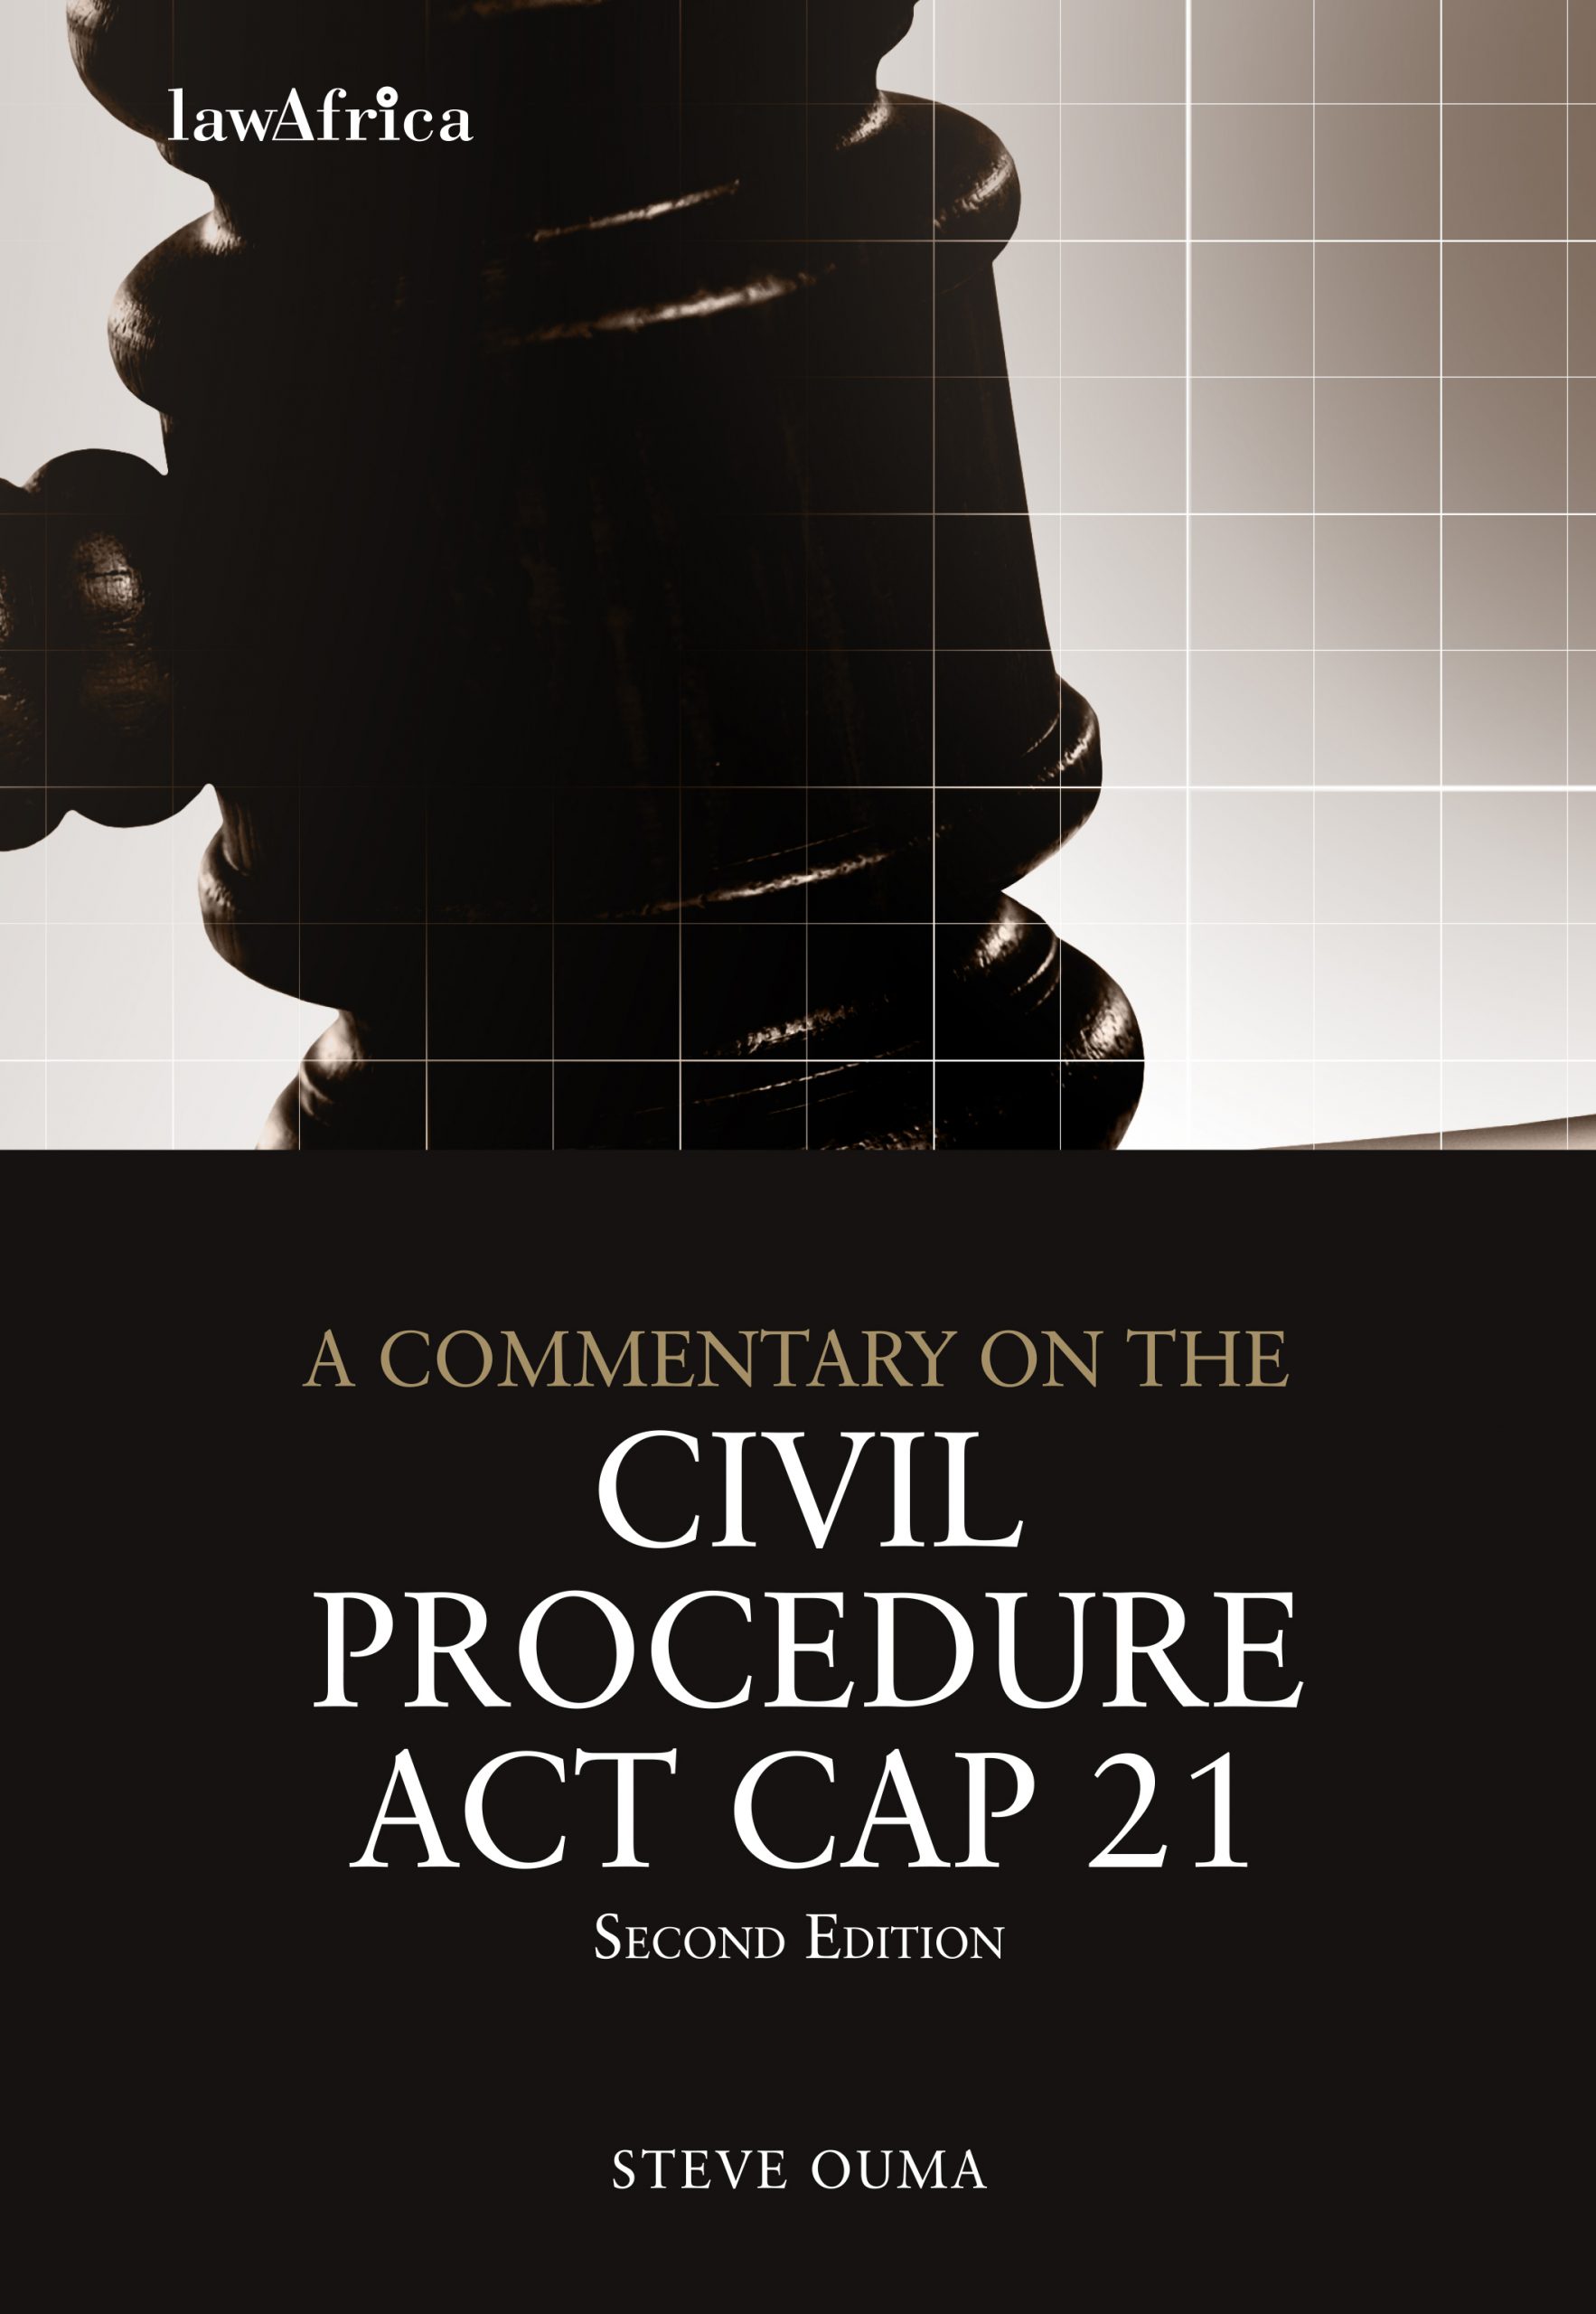 A Commentary on the Civil Procedure Act Cap 21